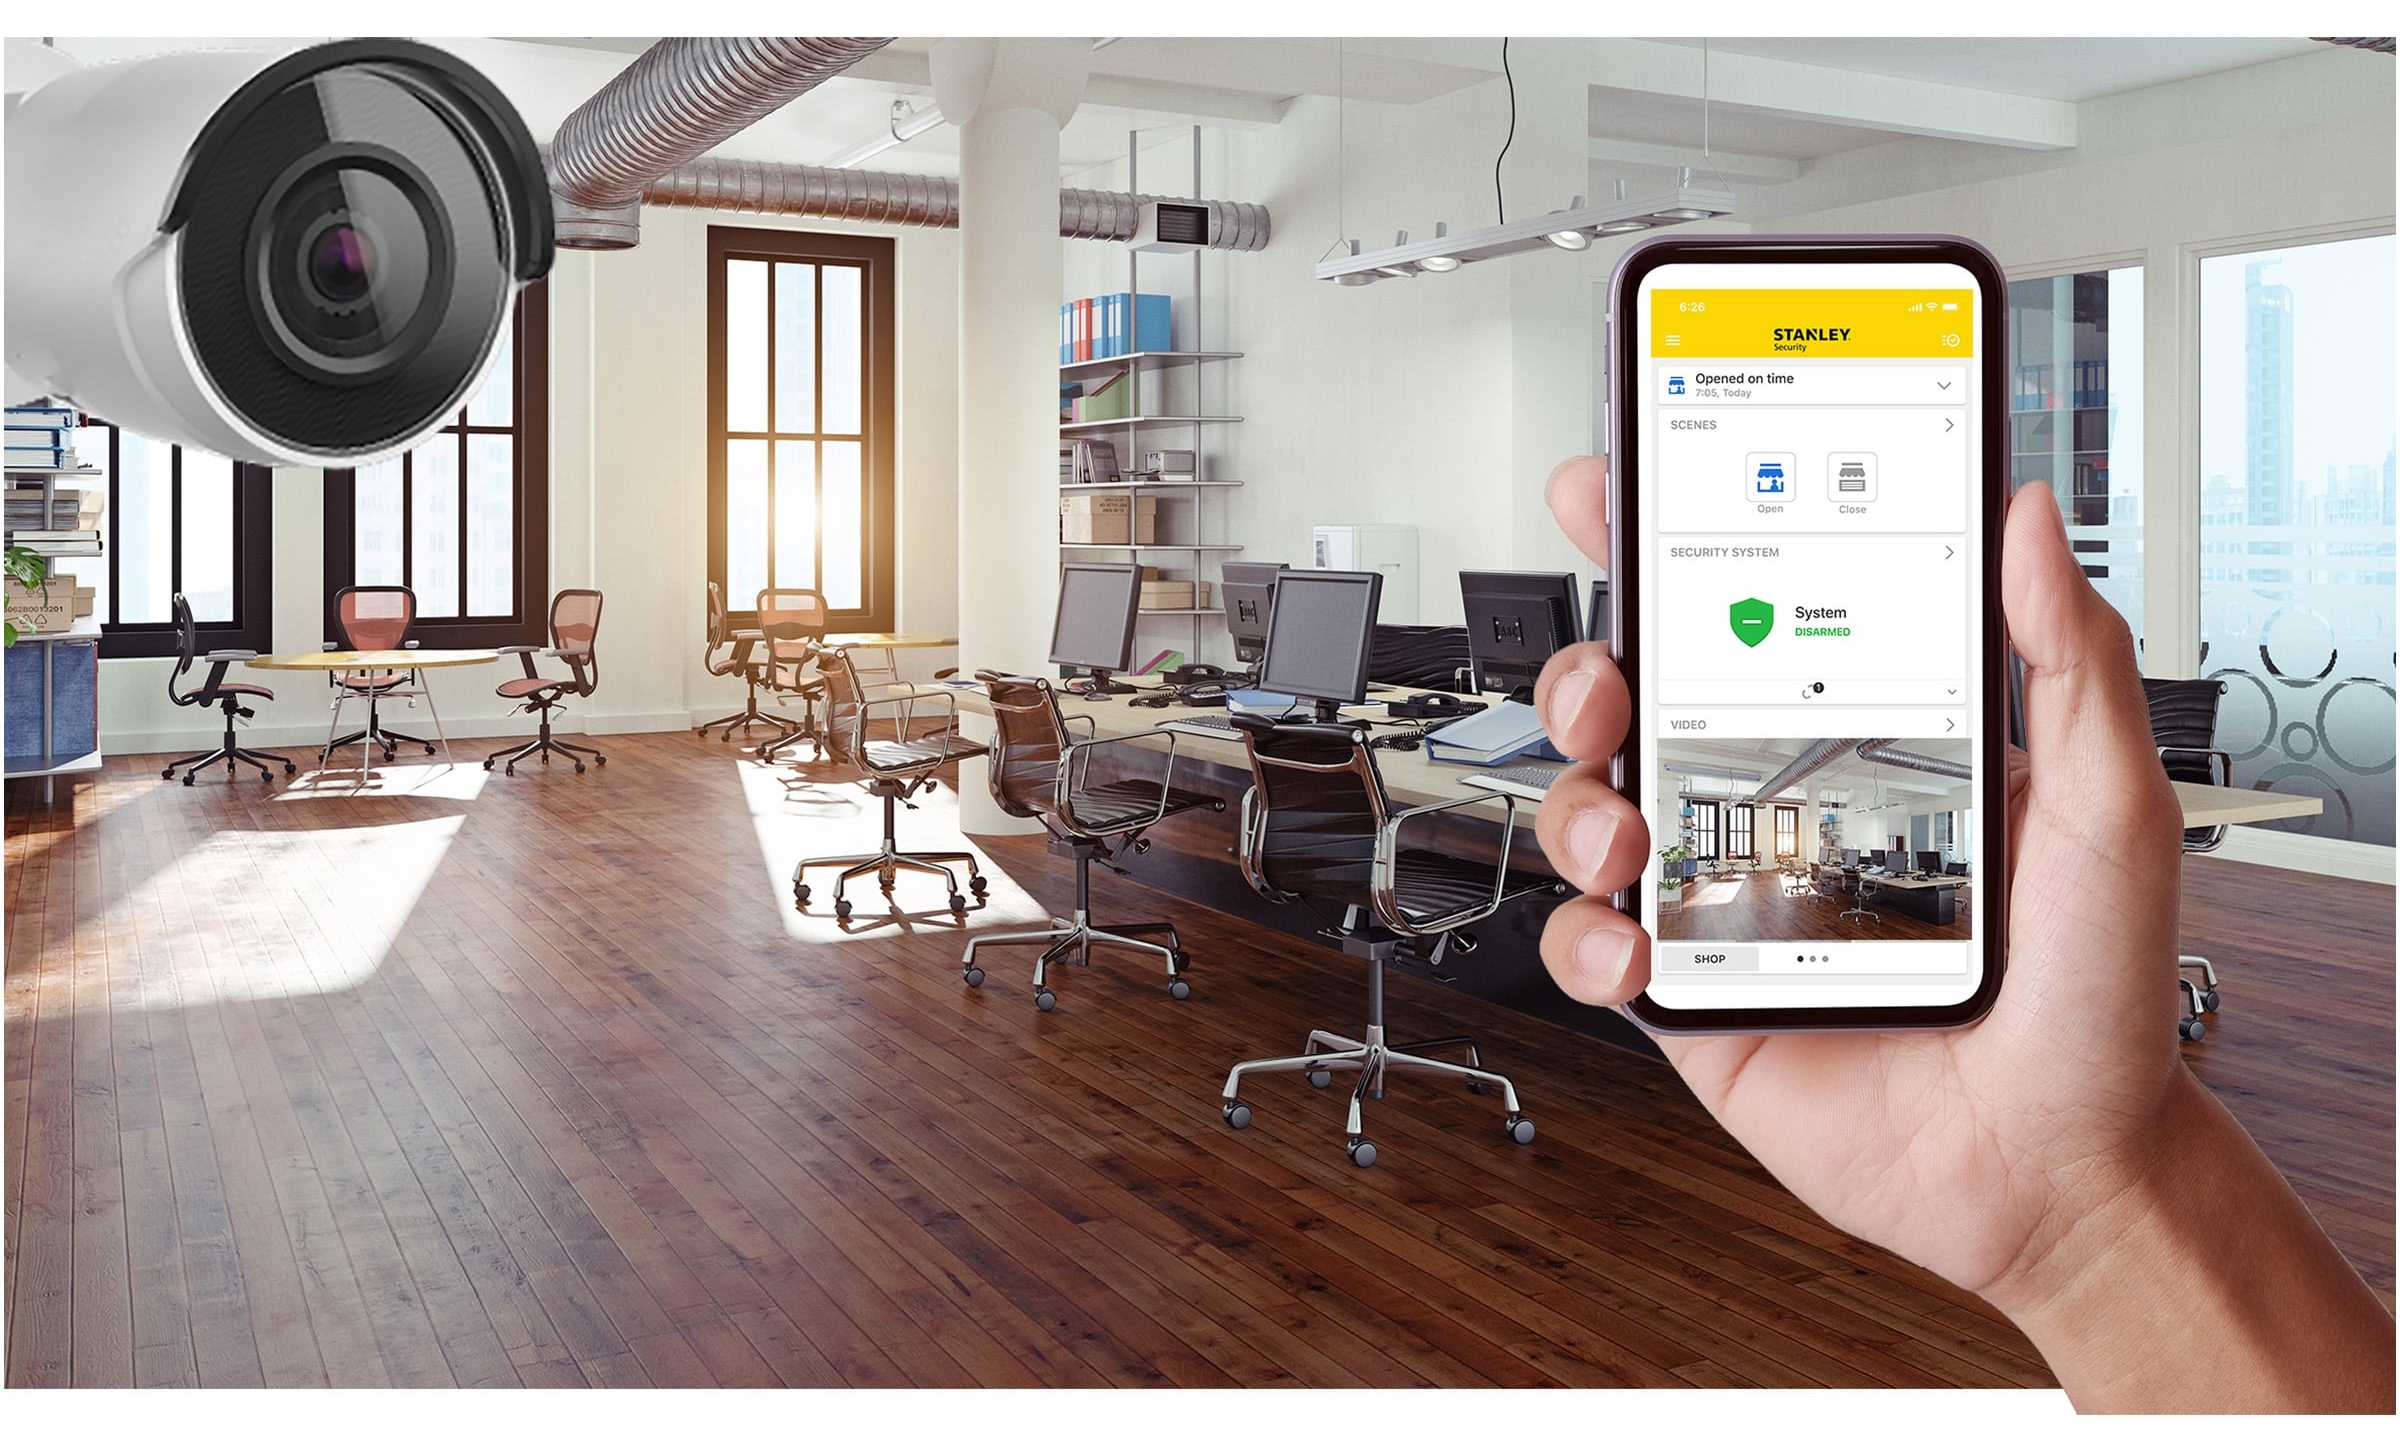 STANLEY security launches STANLEY Interactive, the smart security service for small businesses